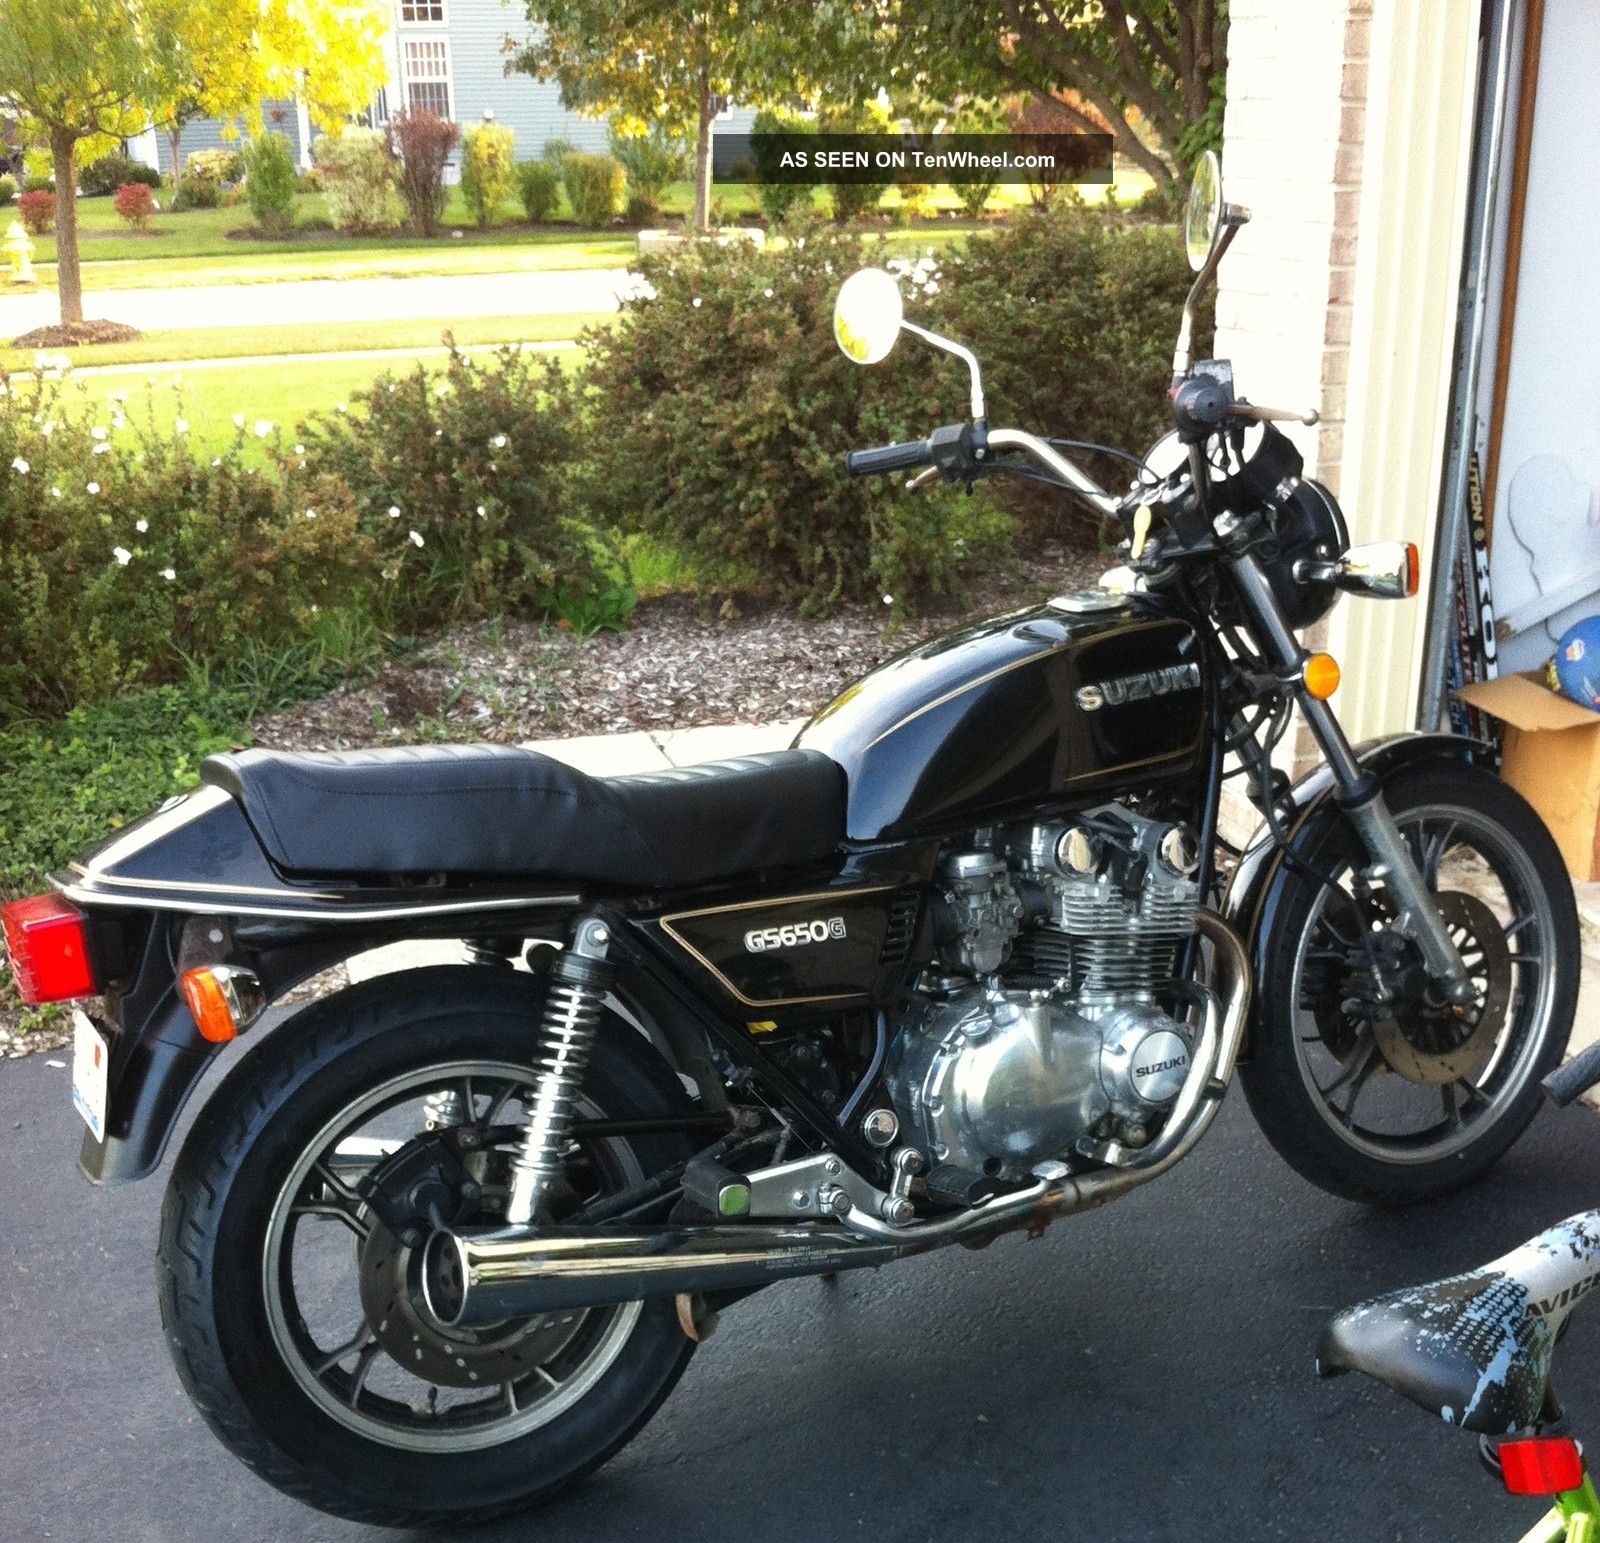 1982_suzuki_gs_650_great_classic_bike_is_all_stock_now_but_would_make_great_cafe_1_lgw.jpg